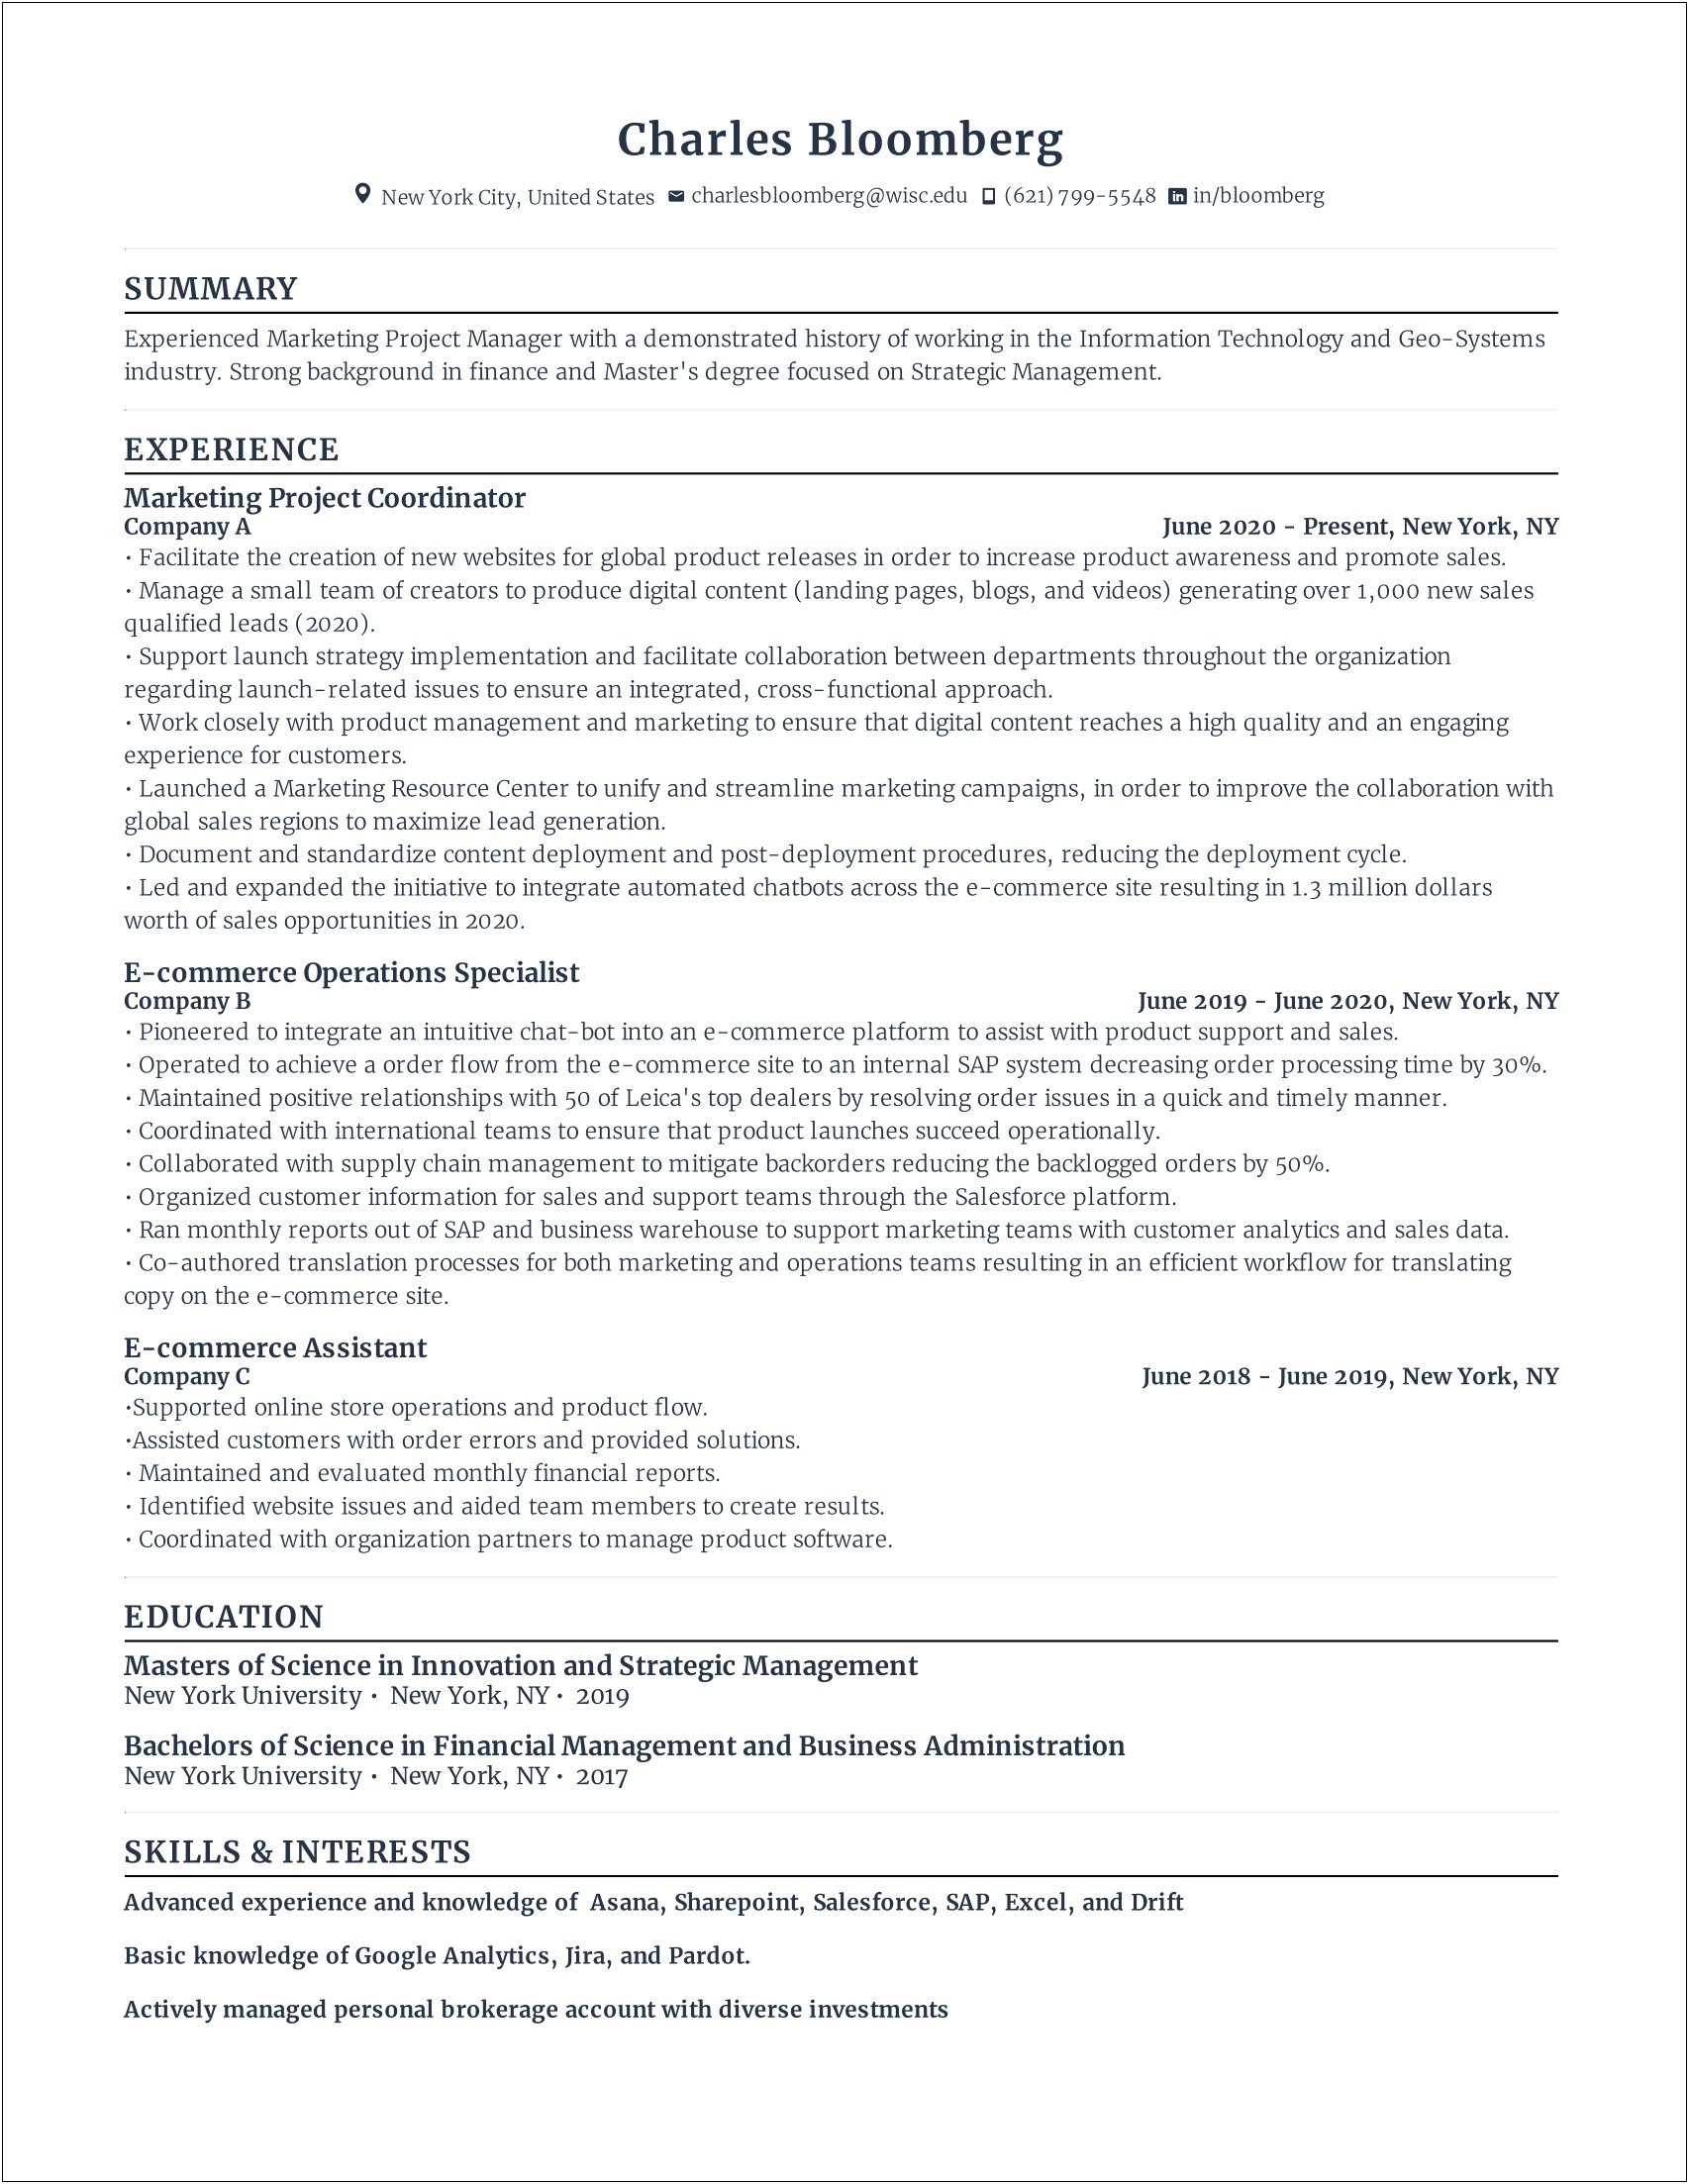 Finance Planning And Analysis Manager Resume